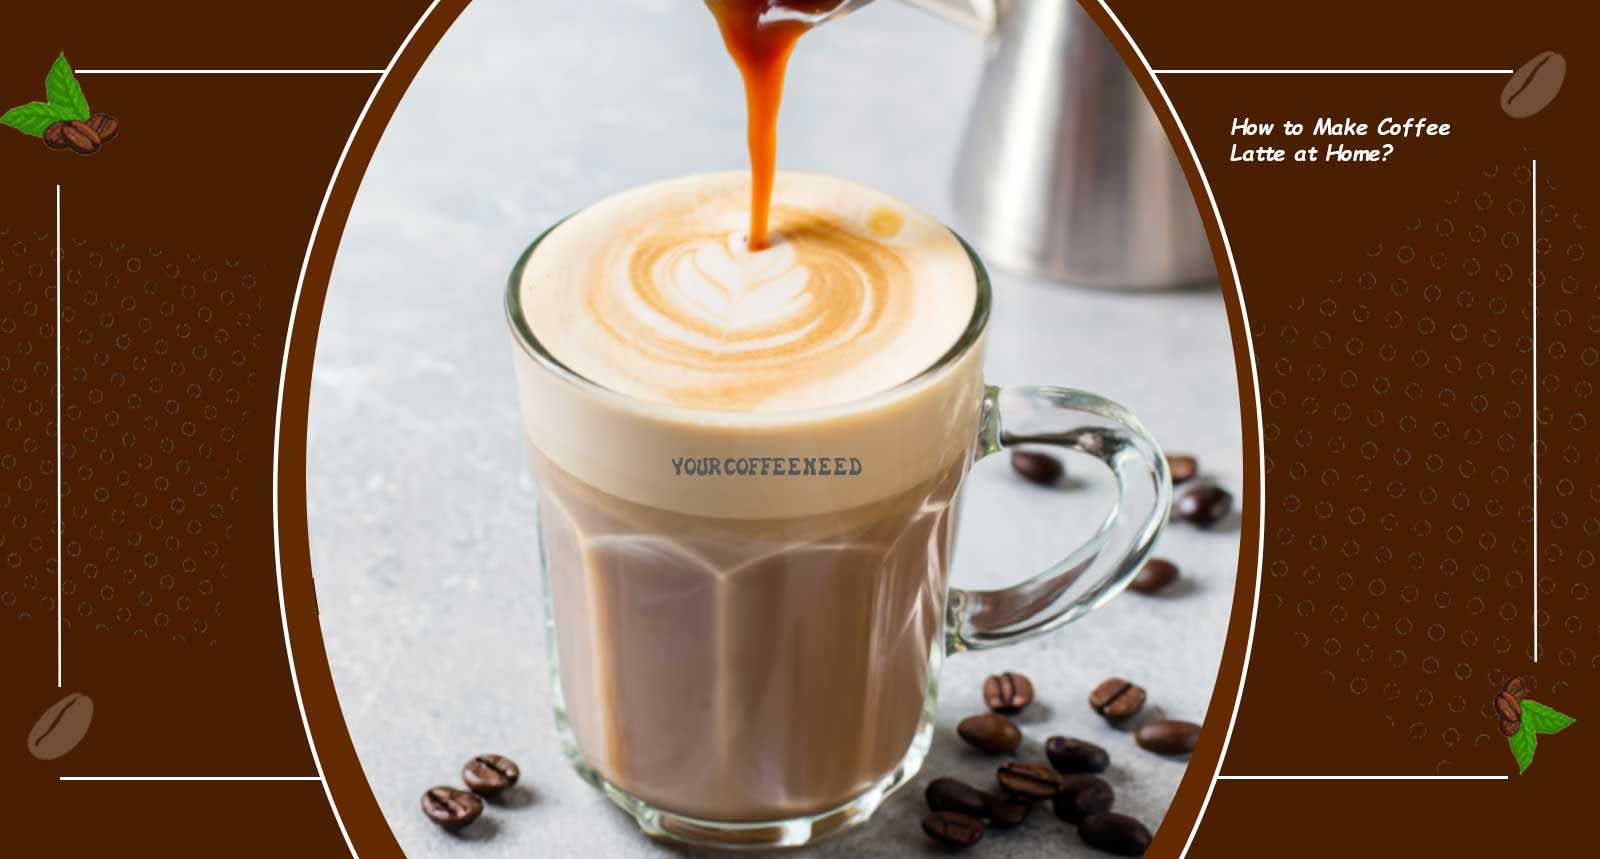 How to Make Coffee Latte at Home?